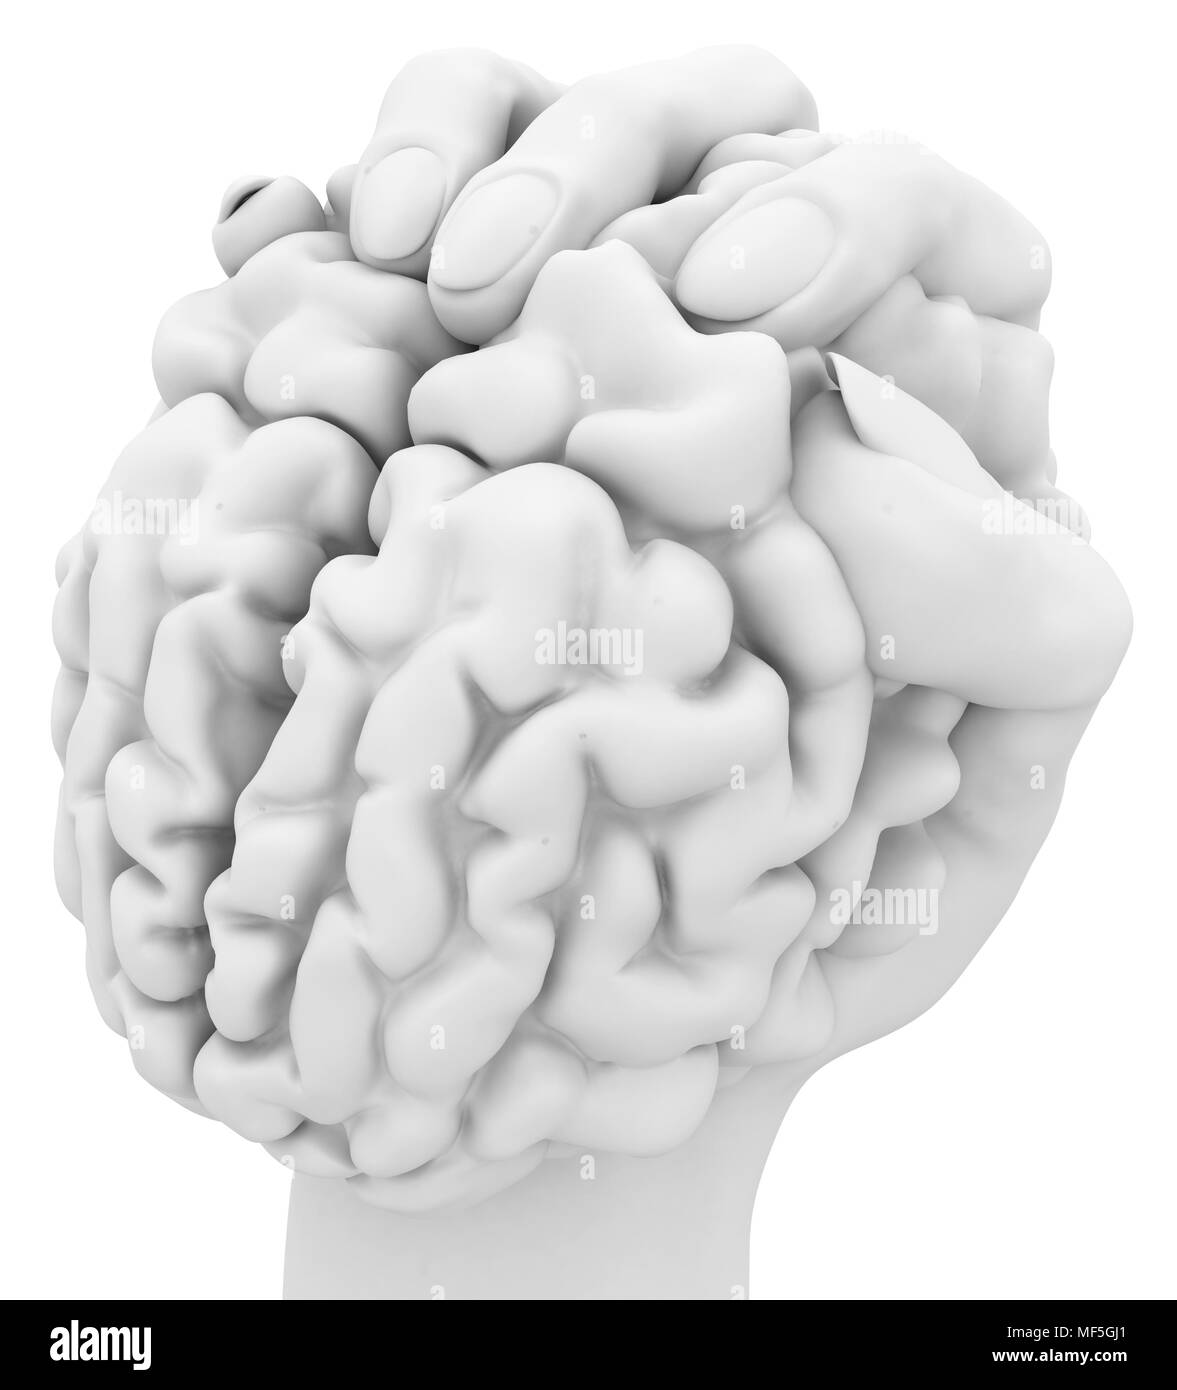 White 3d hand holding a human brain, isolated Stock Photo